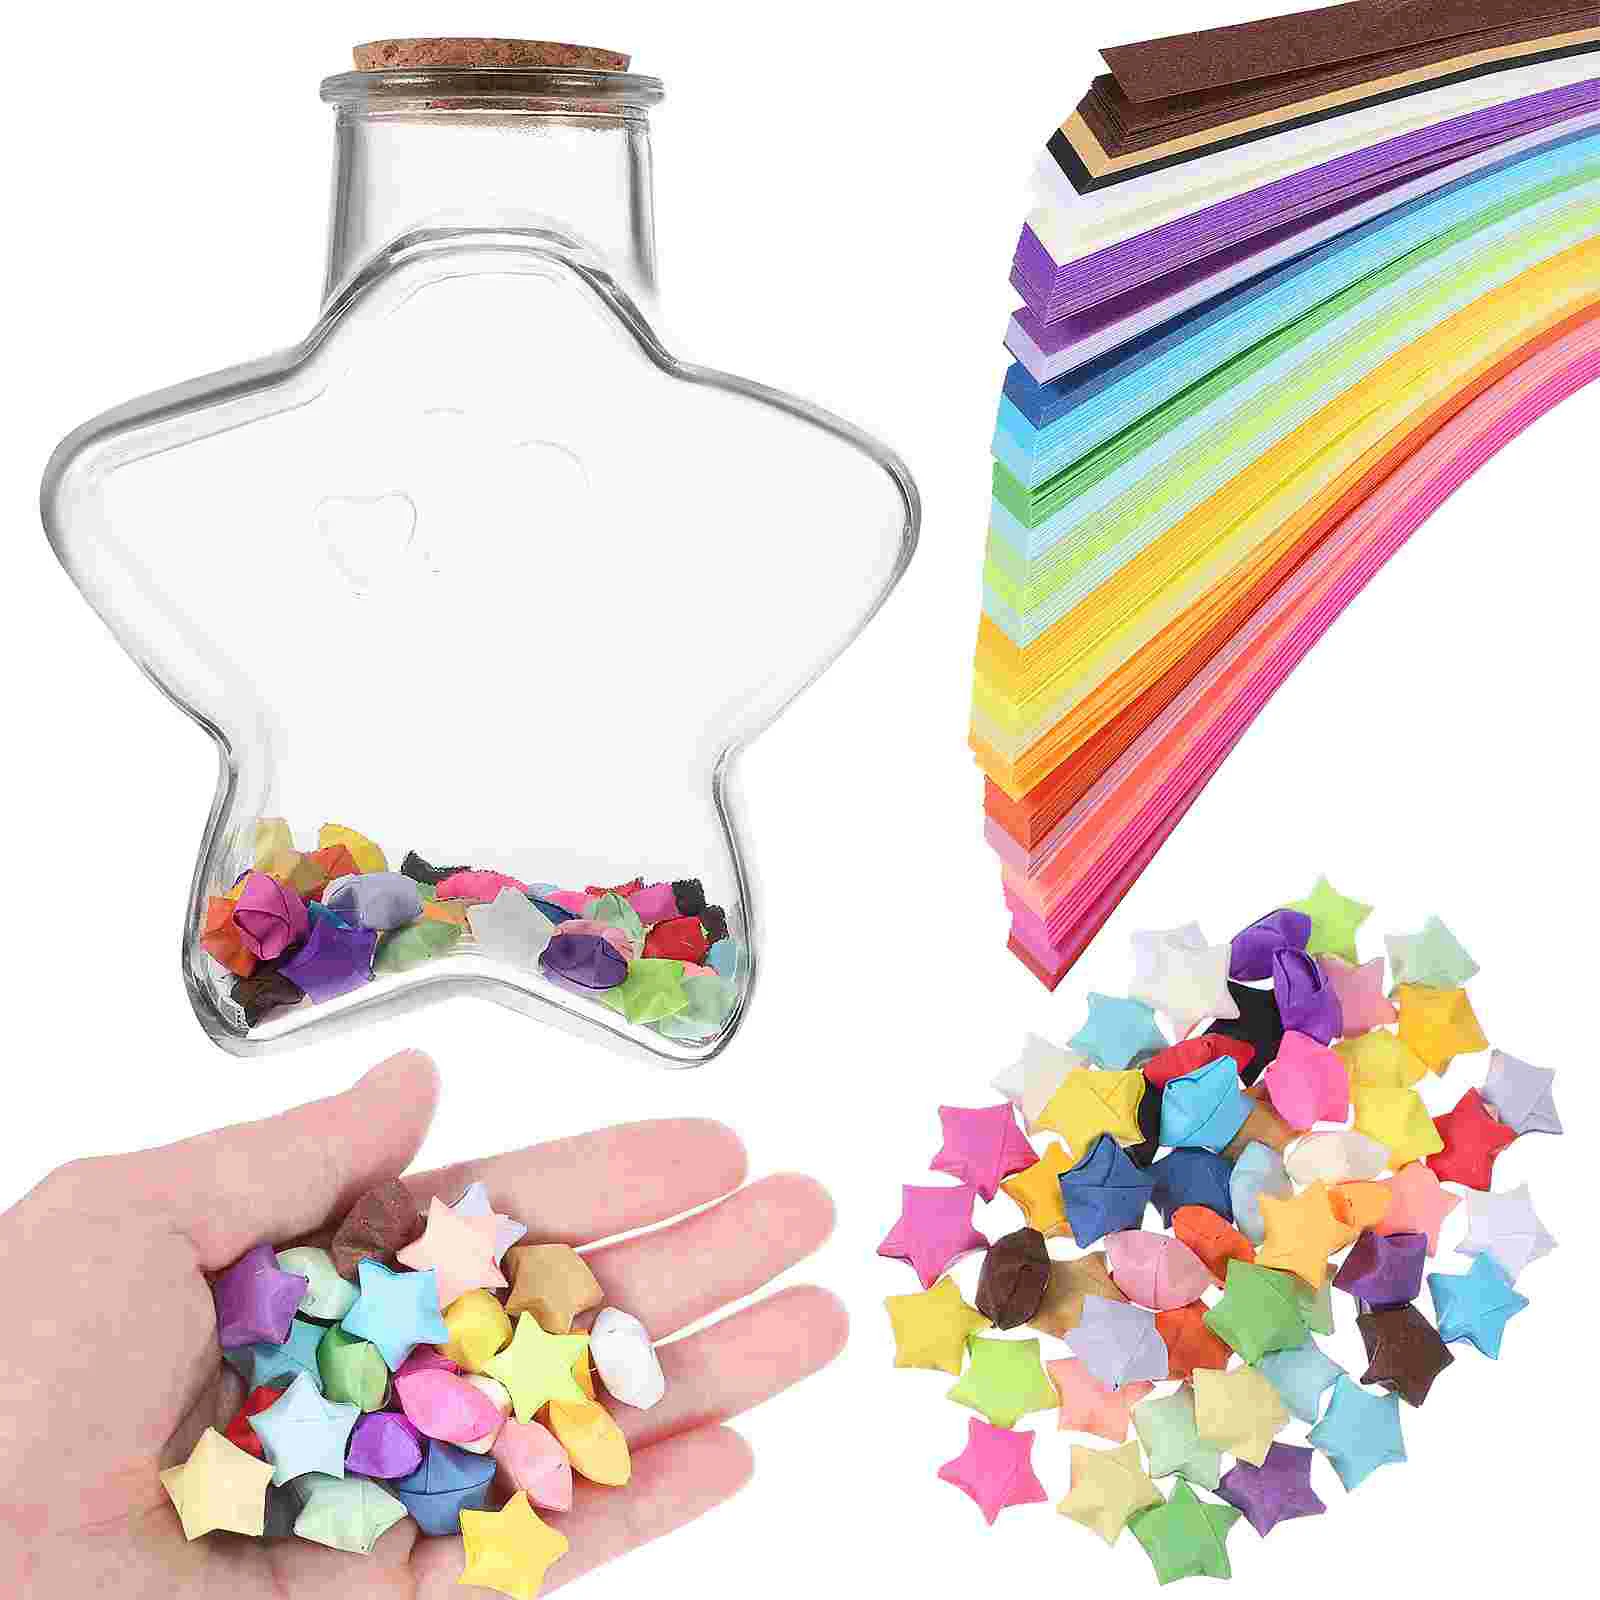 

540 Sheets Room Decorations Origami Star Jar Paper Storage Colorful Cellophane Strips